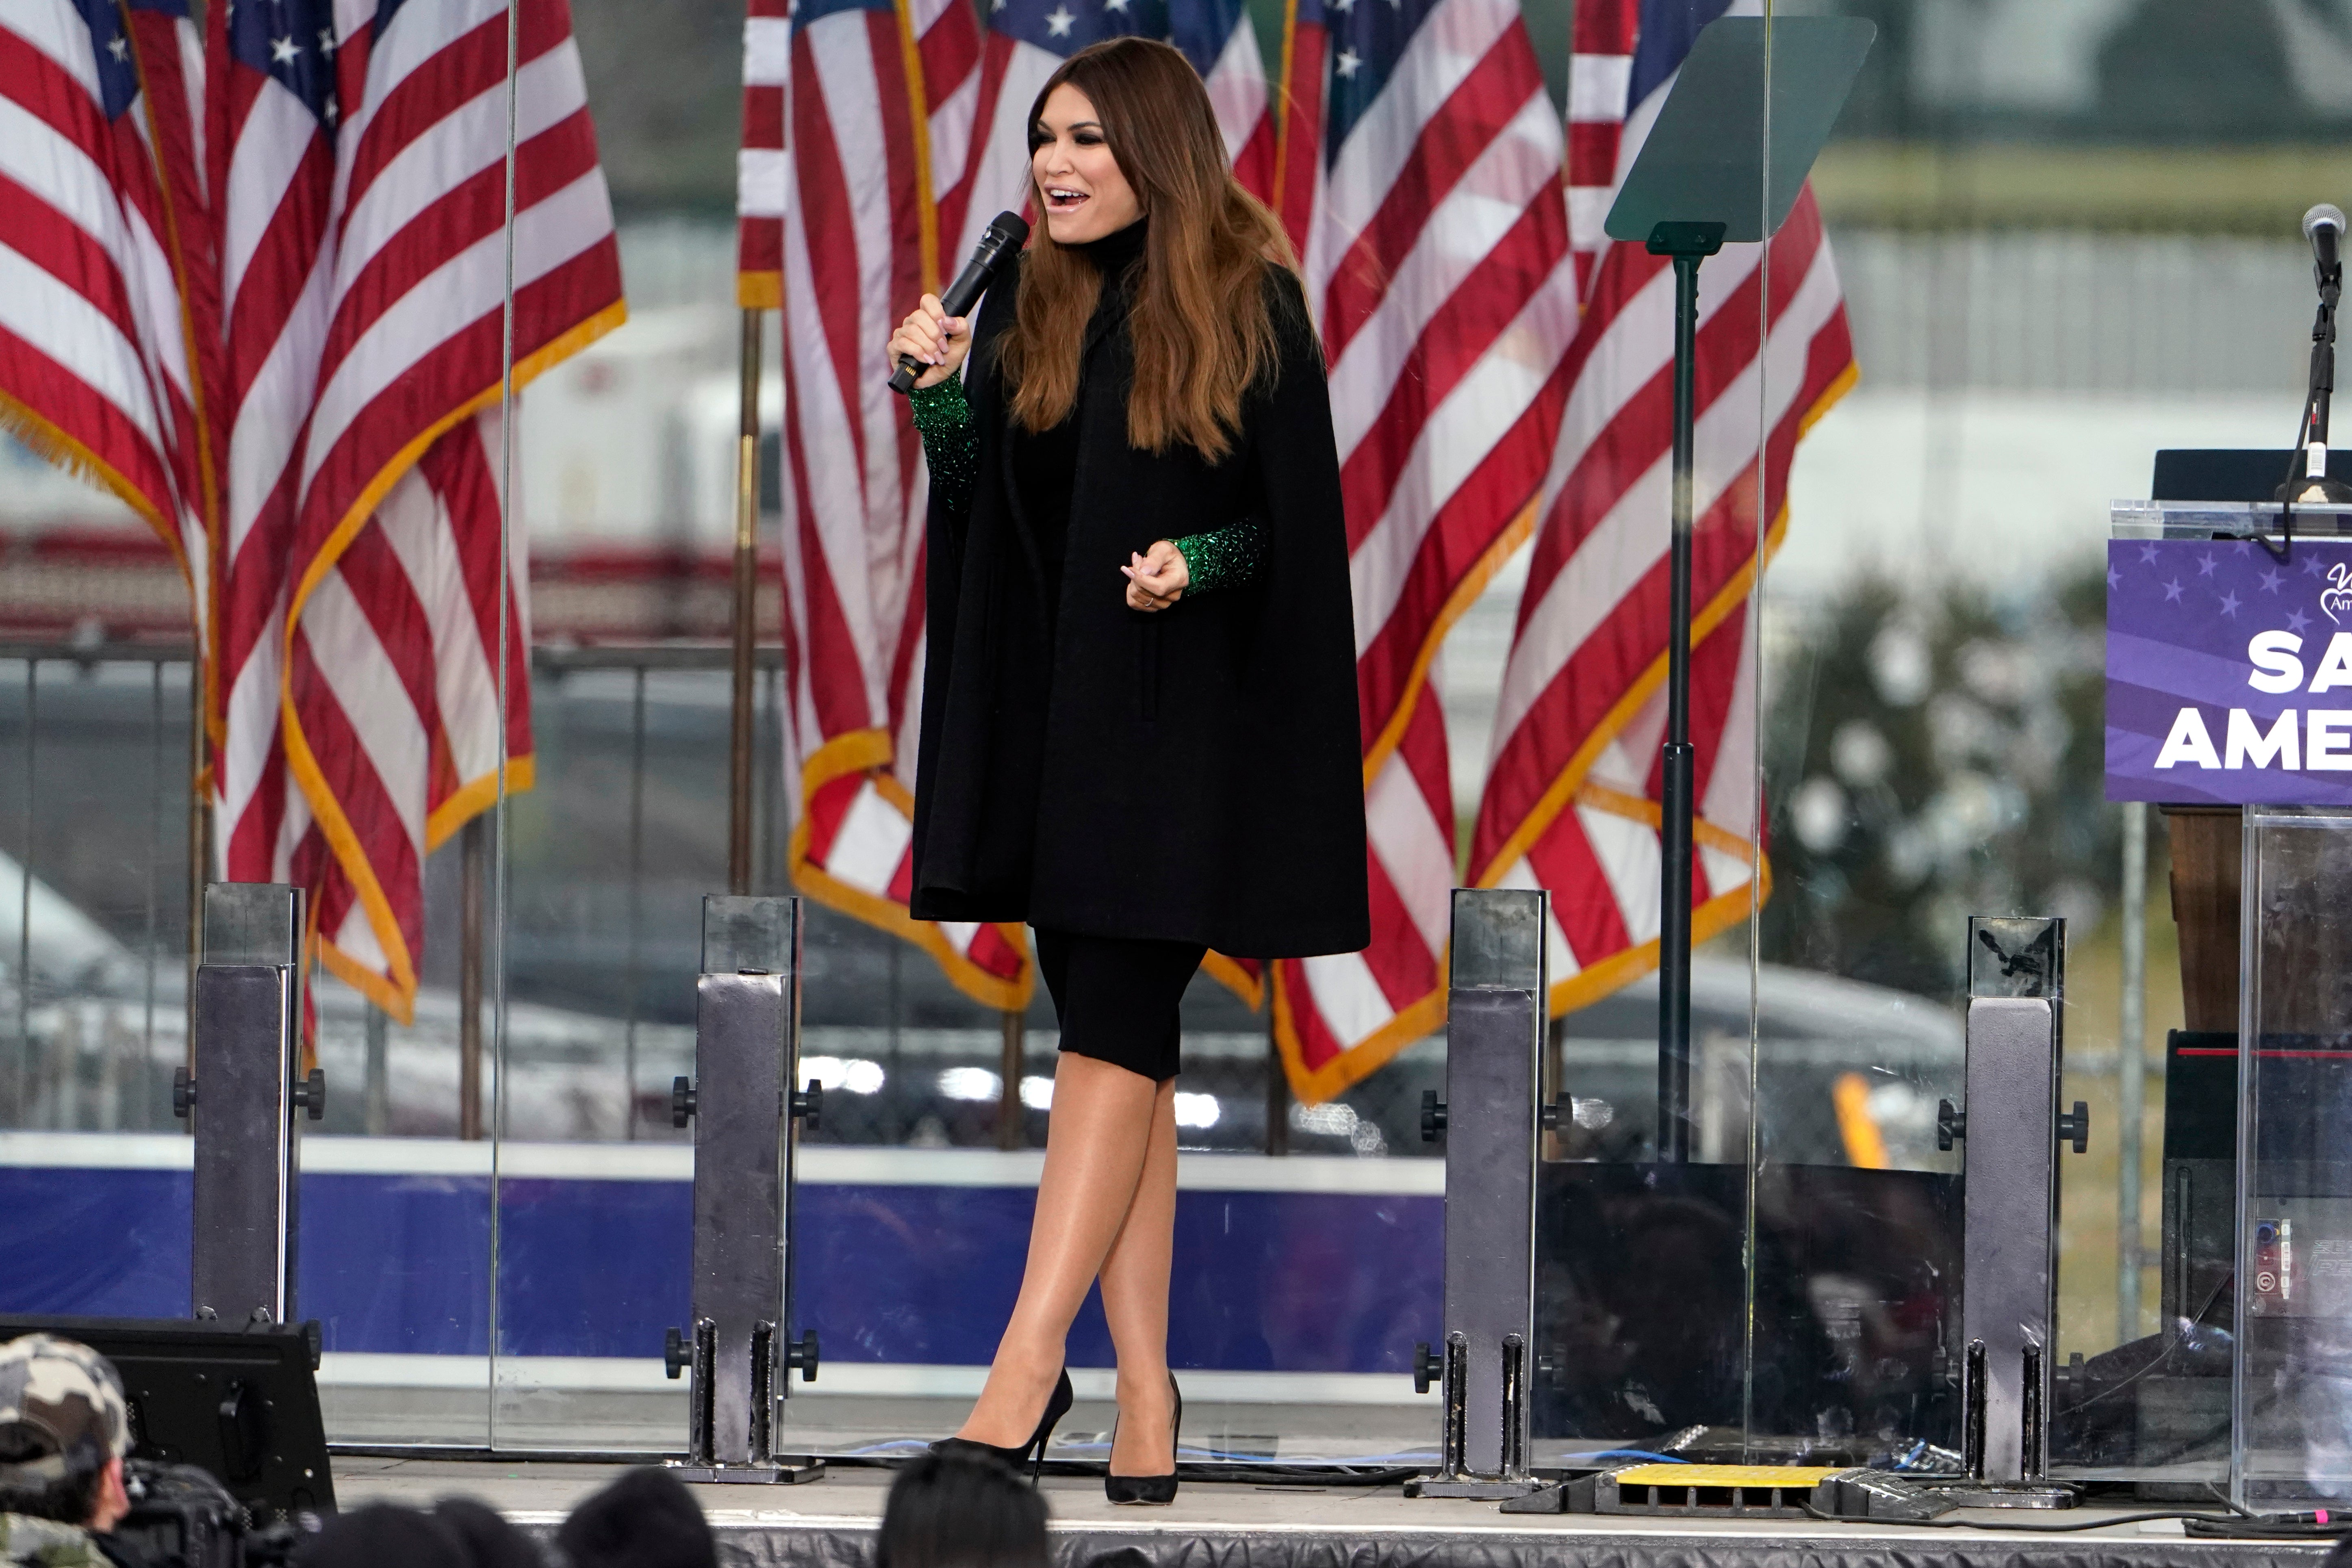 Kimberly Guilfoyle at a rally in support of then-president Donald Trump